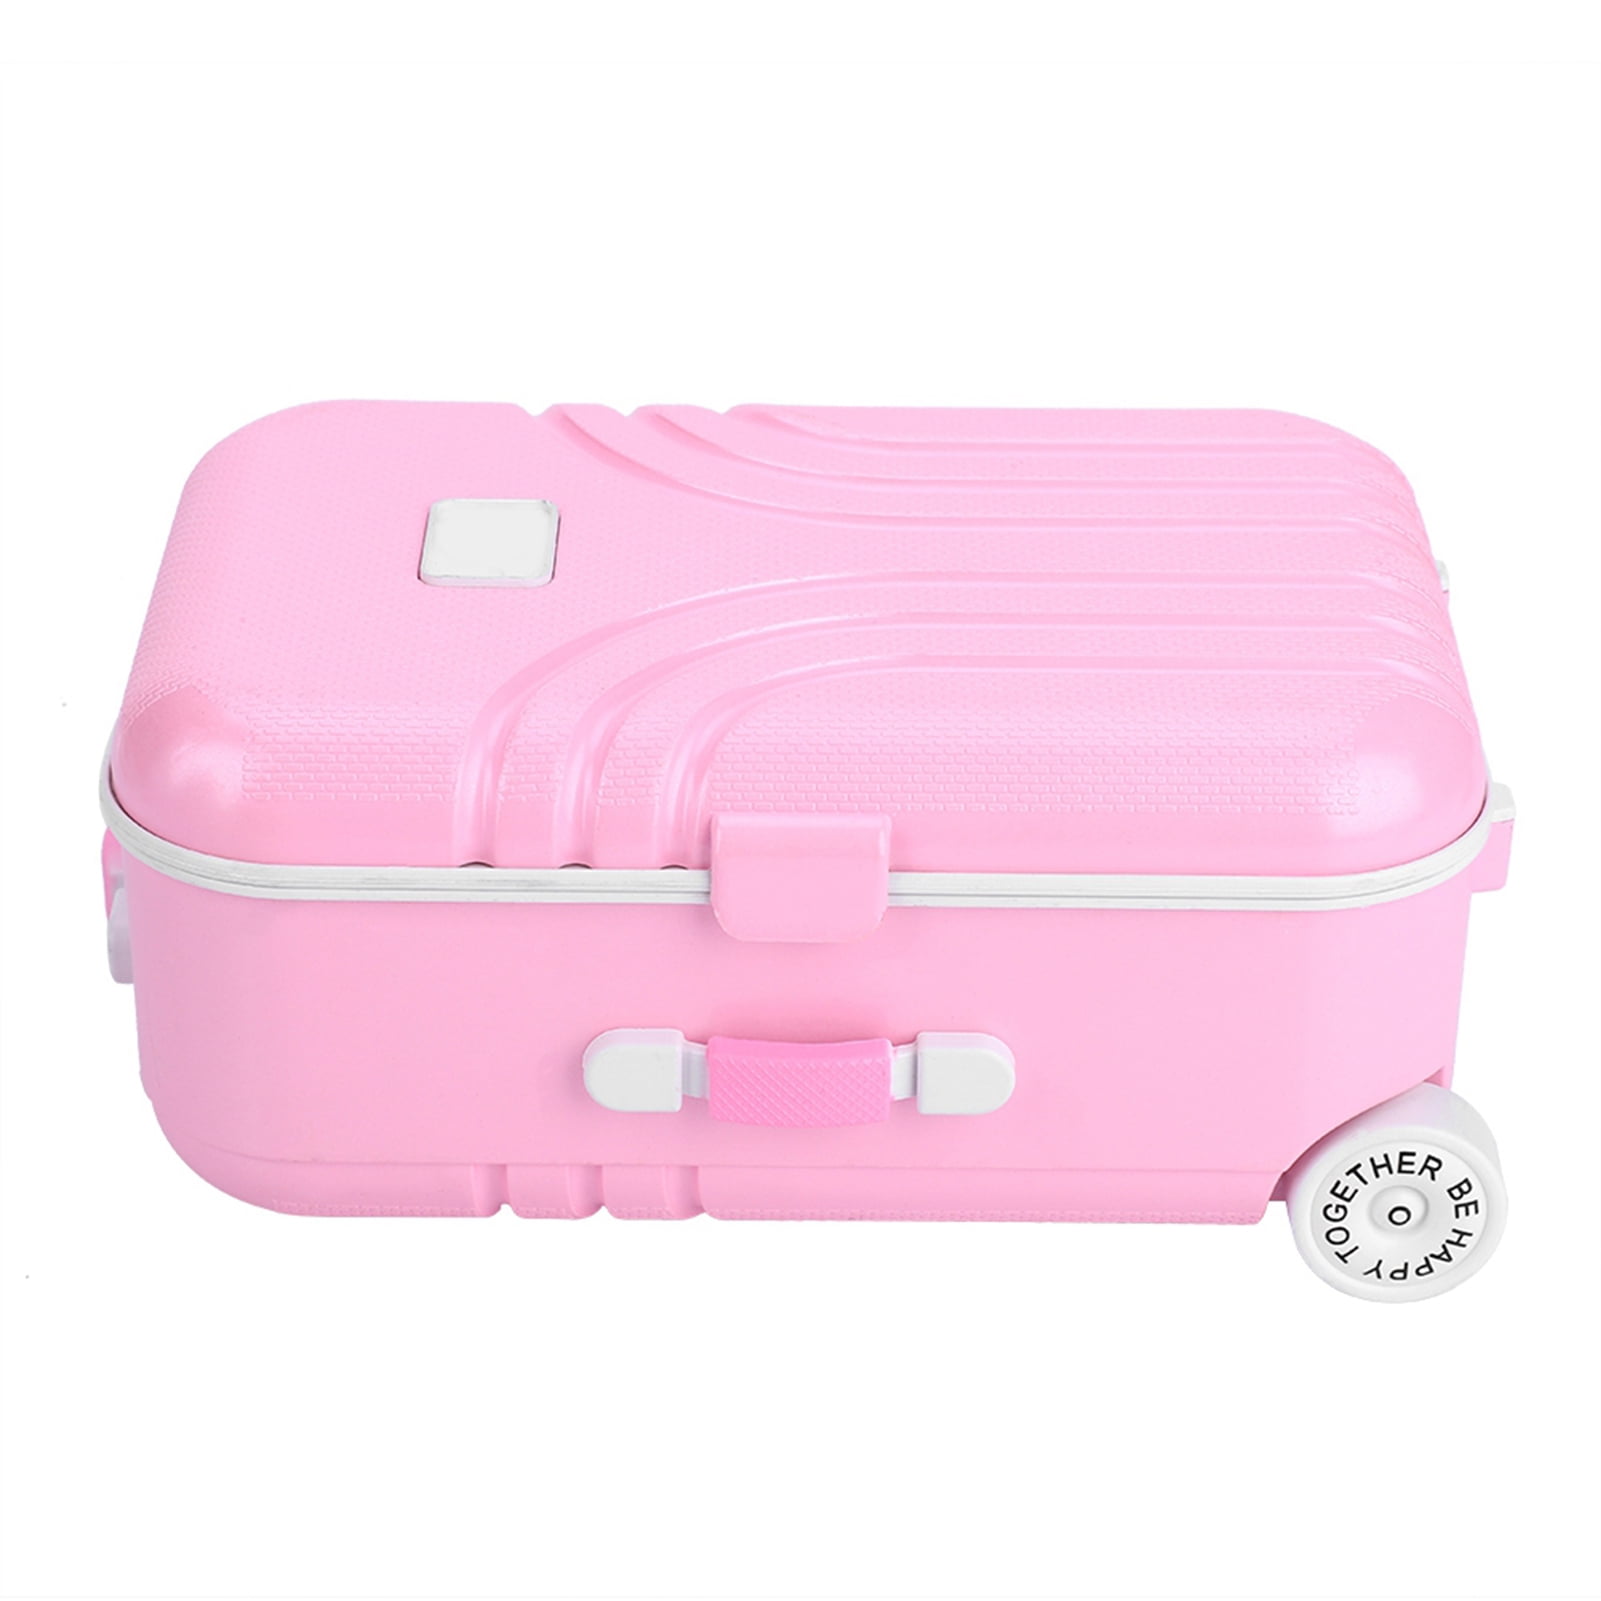 Baby Suitcase S00 - For Baby